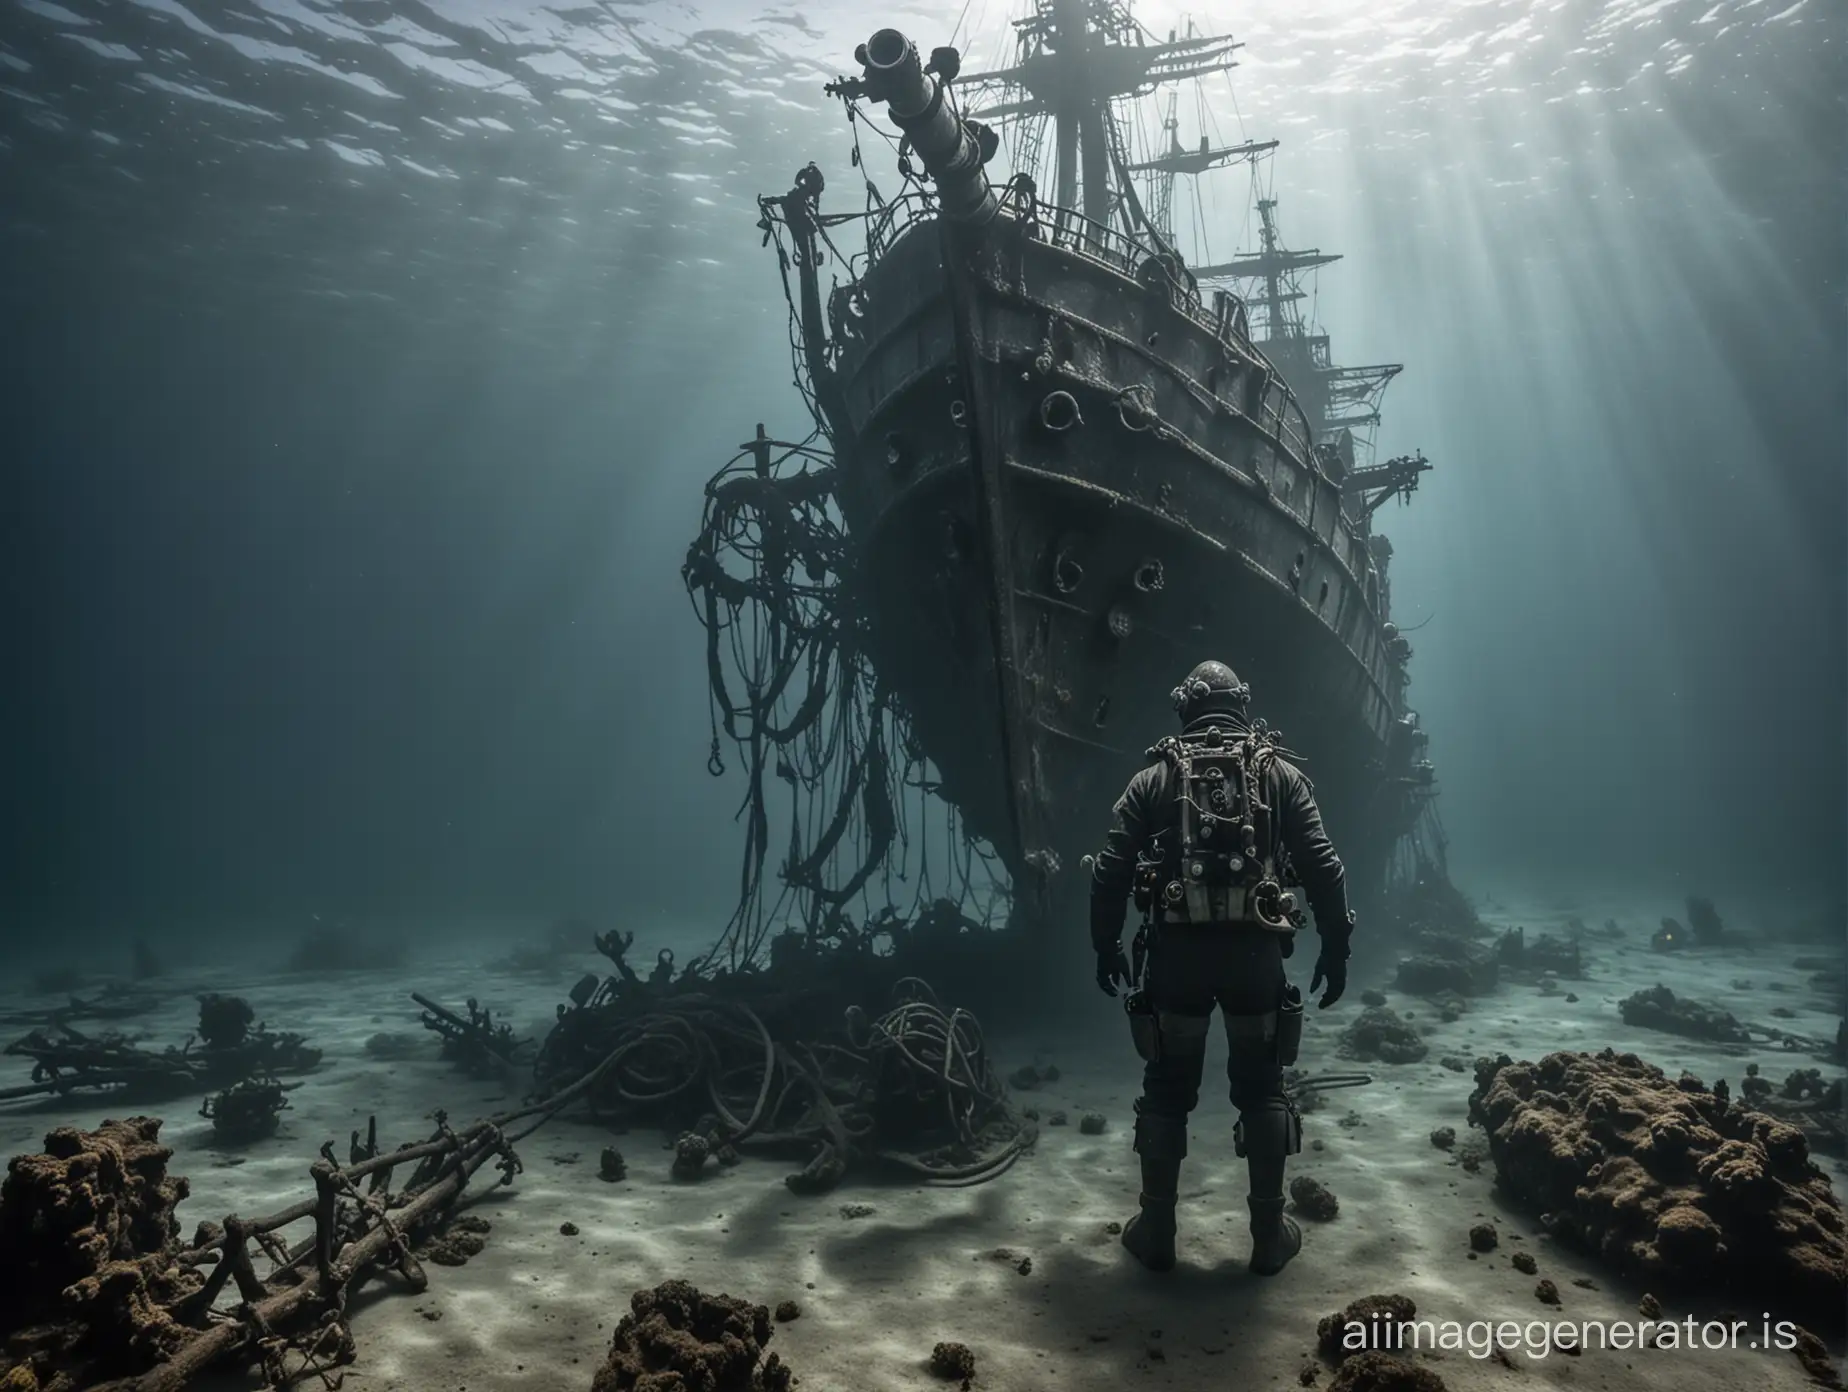 The old diver stands at the bottom of the ocean, with a sunken huge Frigate in the background